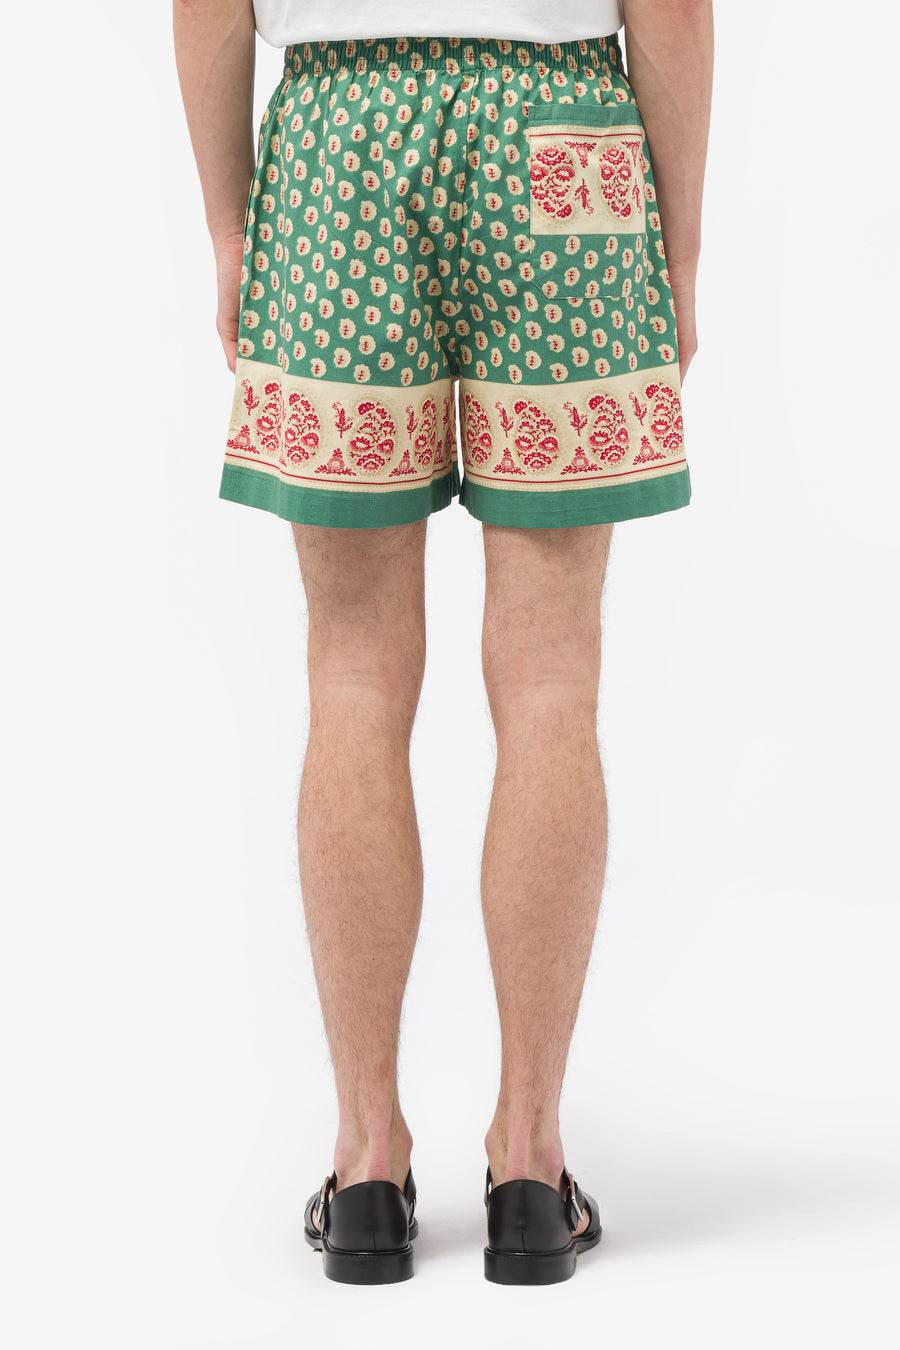 Paisley Frame Shorts in Teal/Multi